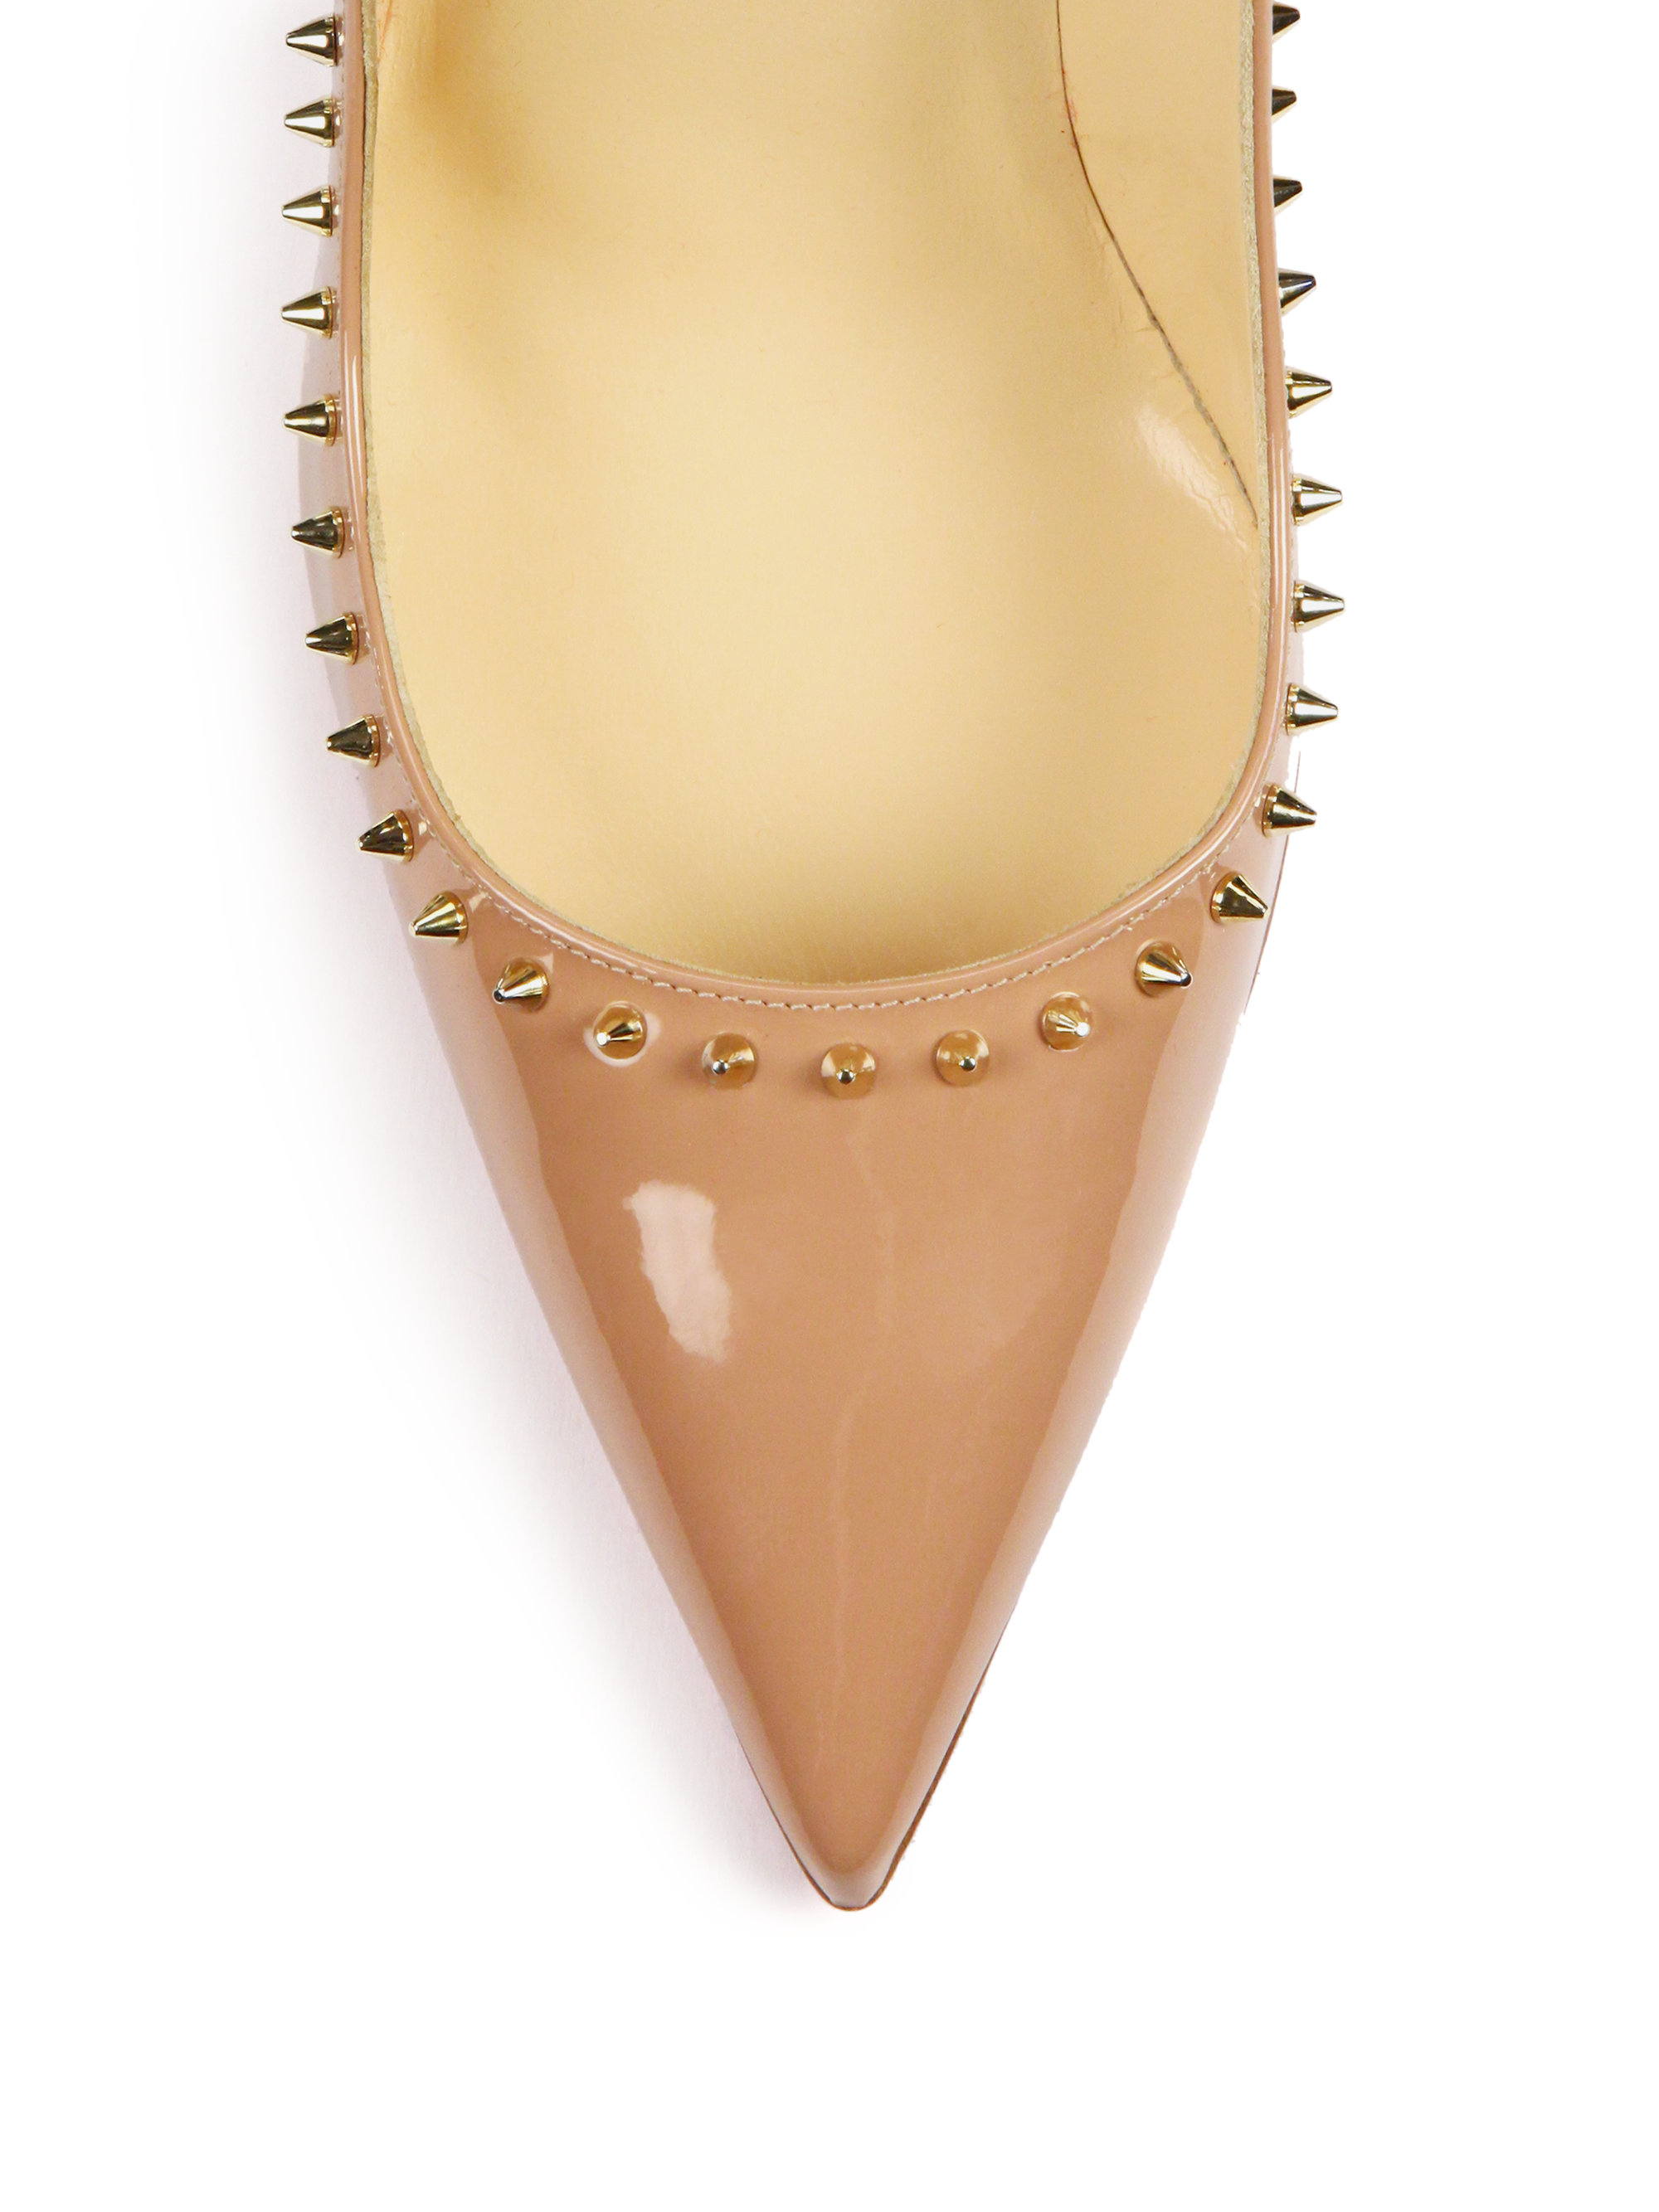 christian louboutin cork flats Beige white patent leather details ...  